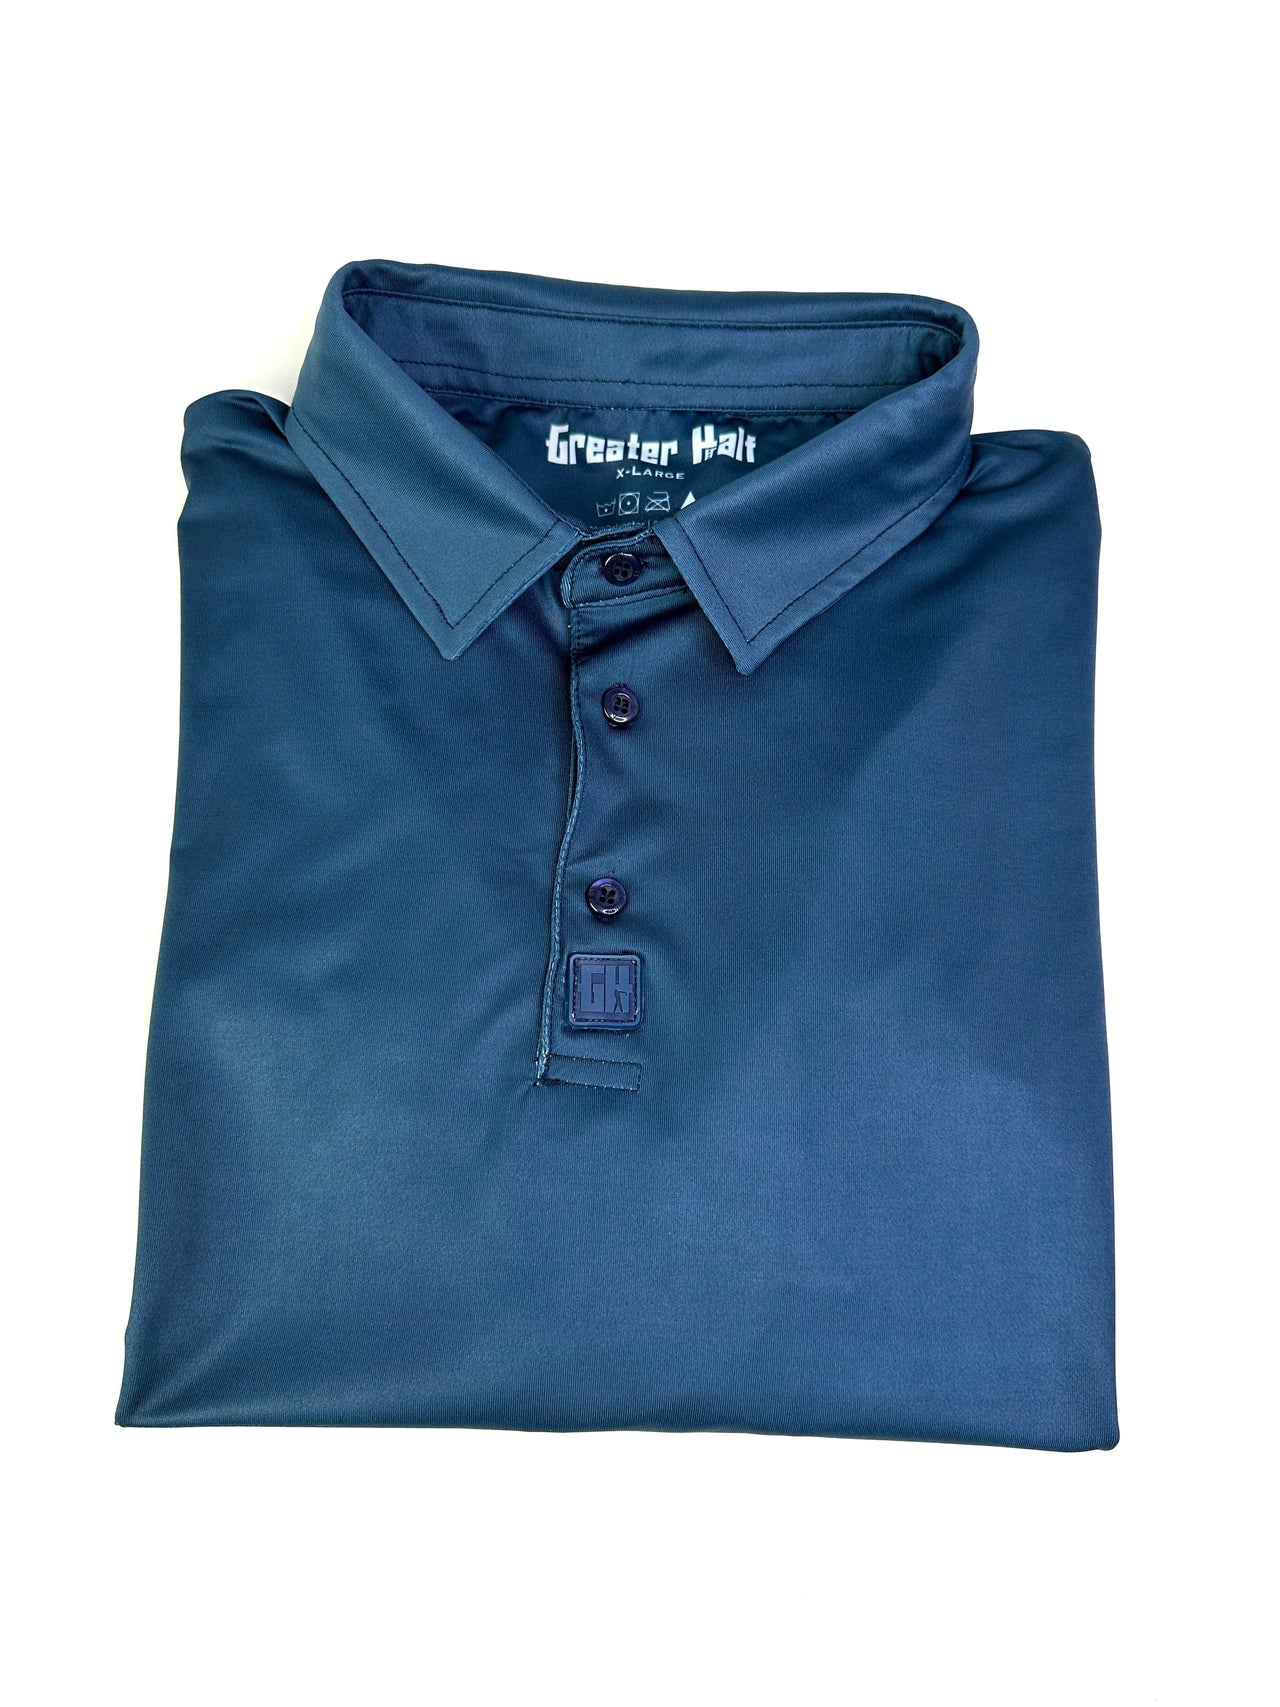 Depths - Performance Polo - Greater Half